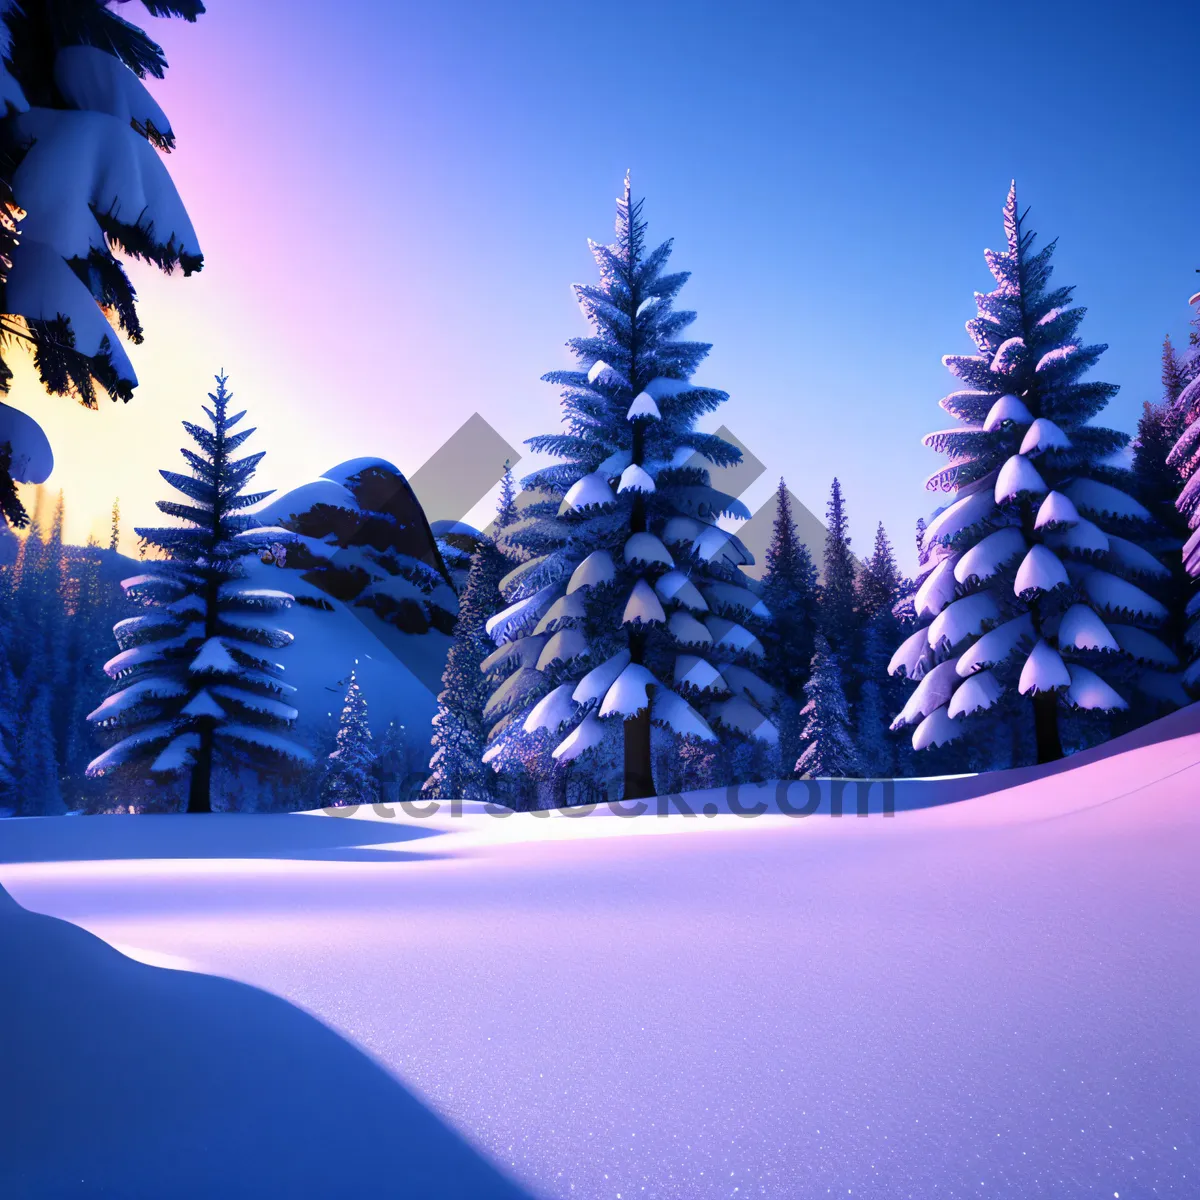 Picture of Majestic Winter Wonderland: Evergreen Forest by the Snowy Lake